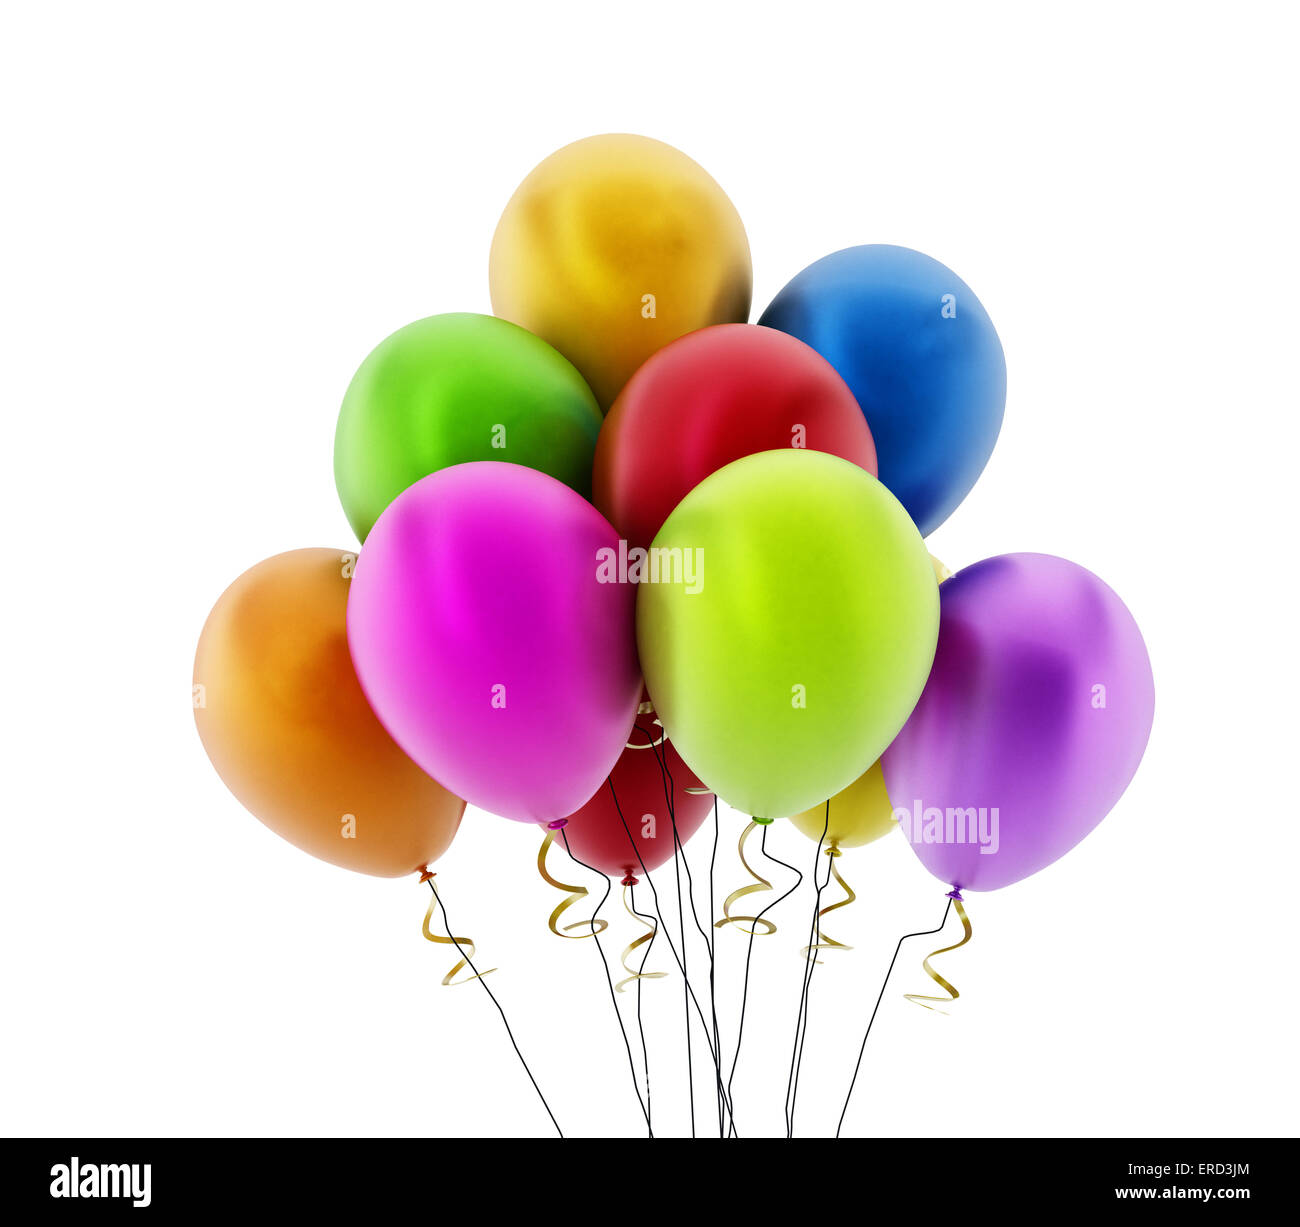 Multi colored decorative party balloons. Stock Photo